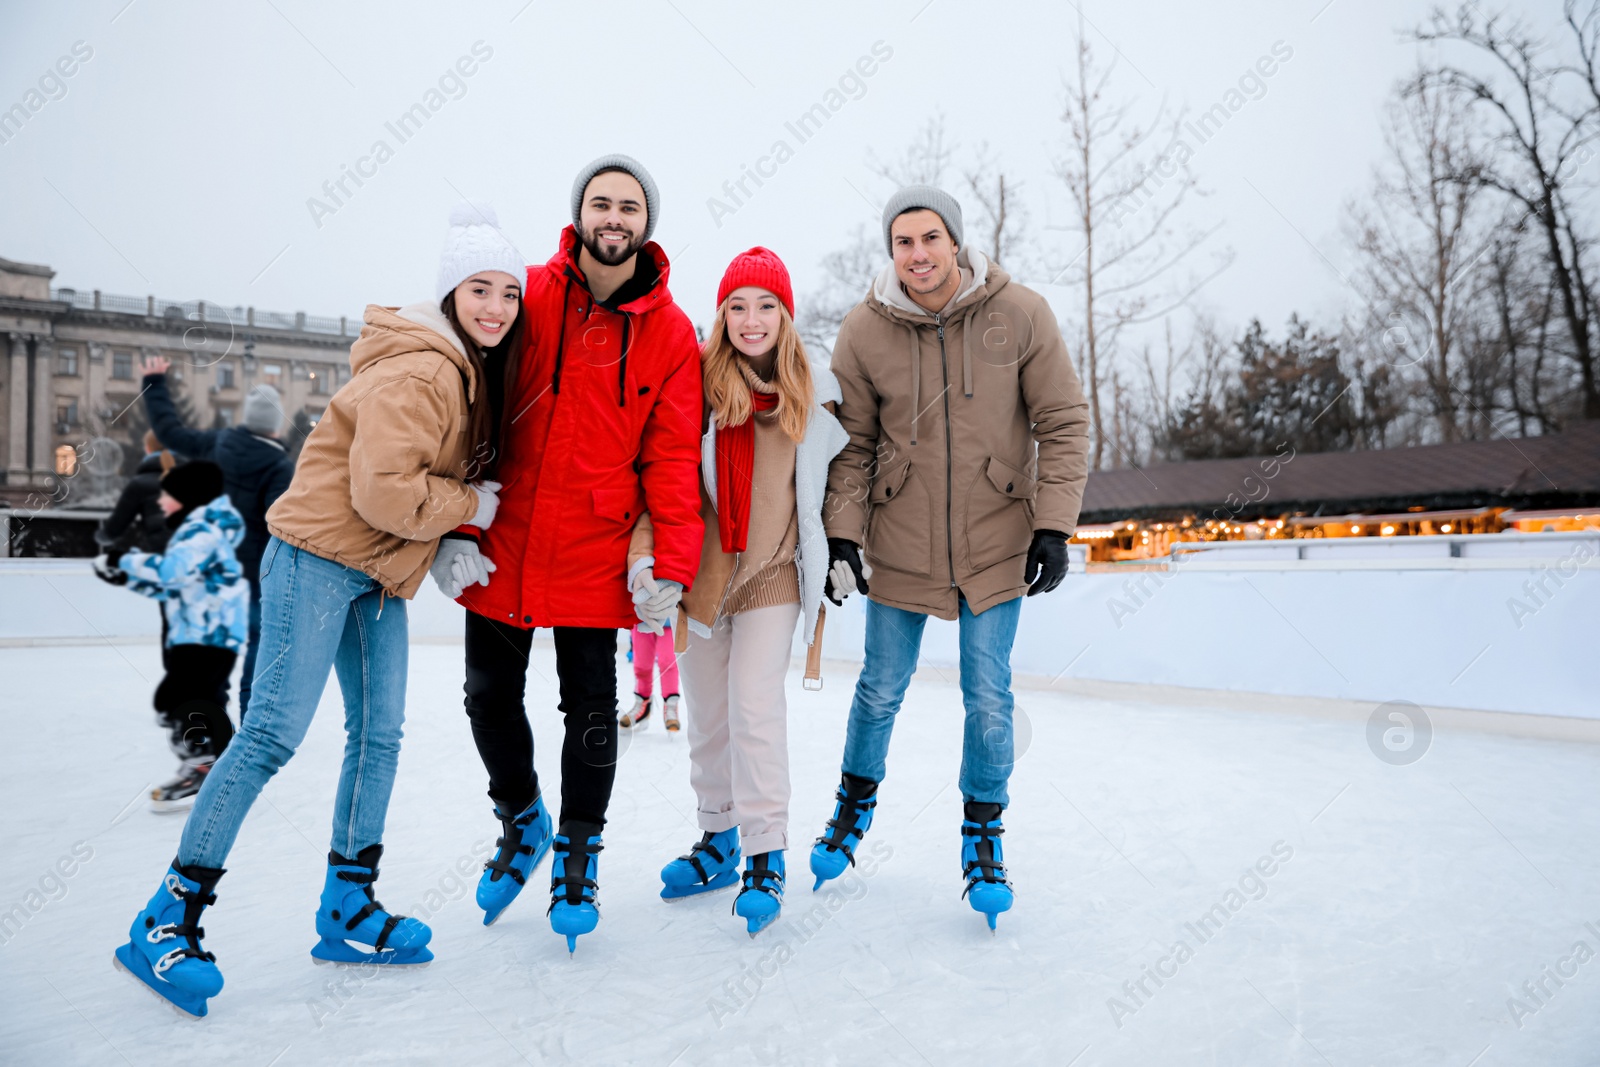 Image of Group of friends at outdoor ice skating rink